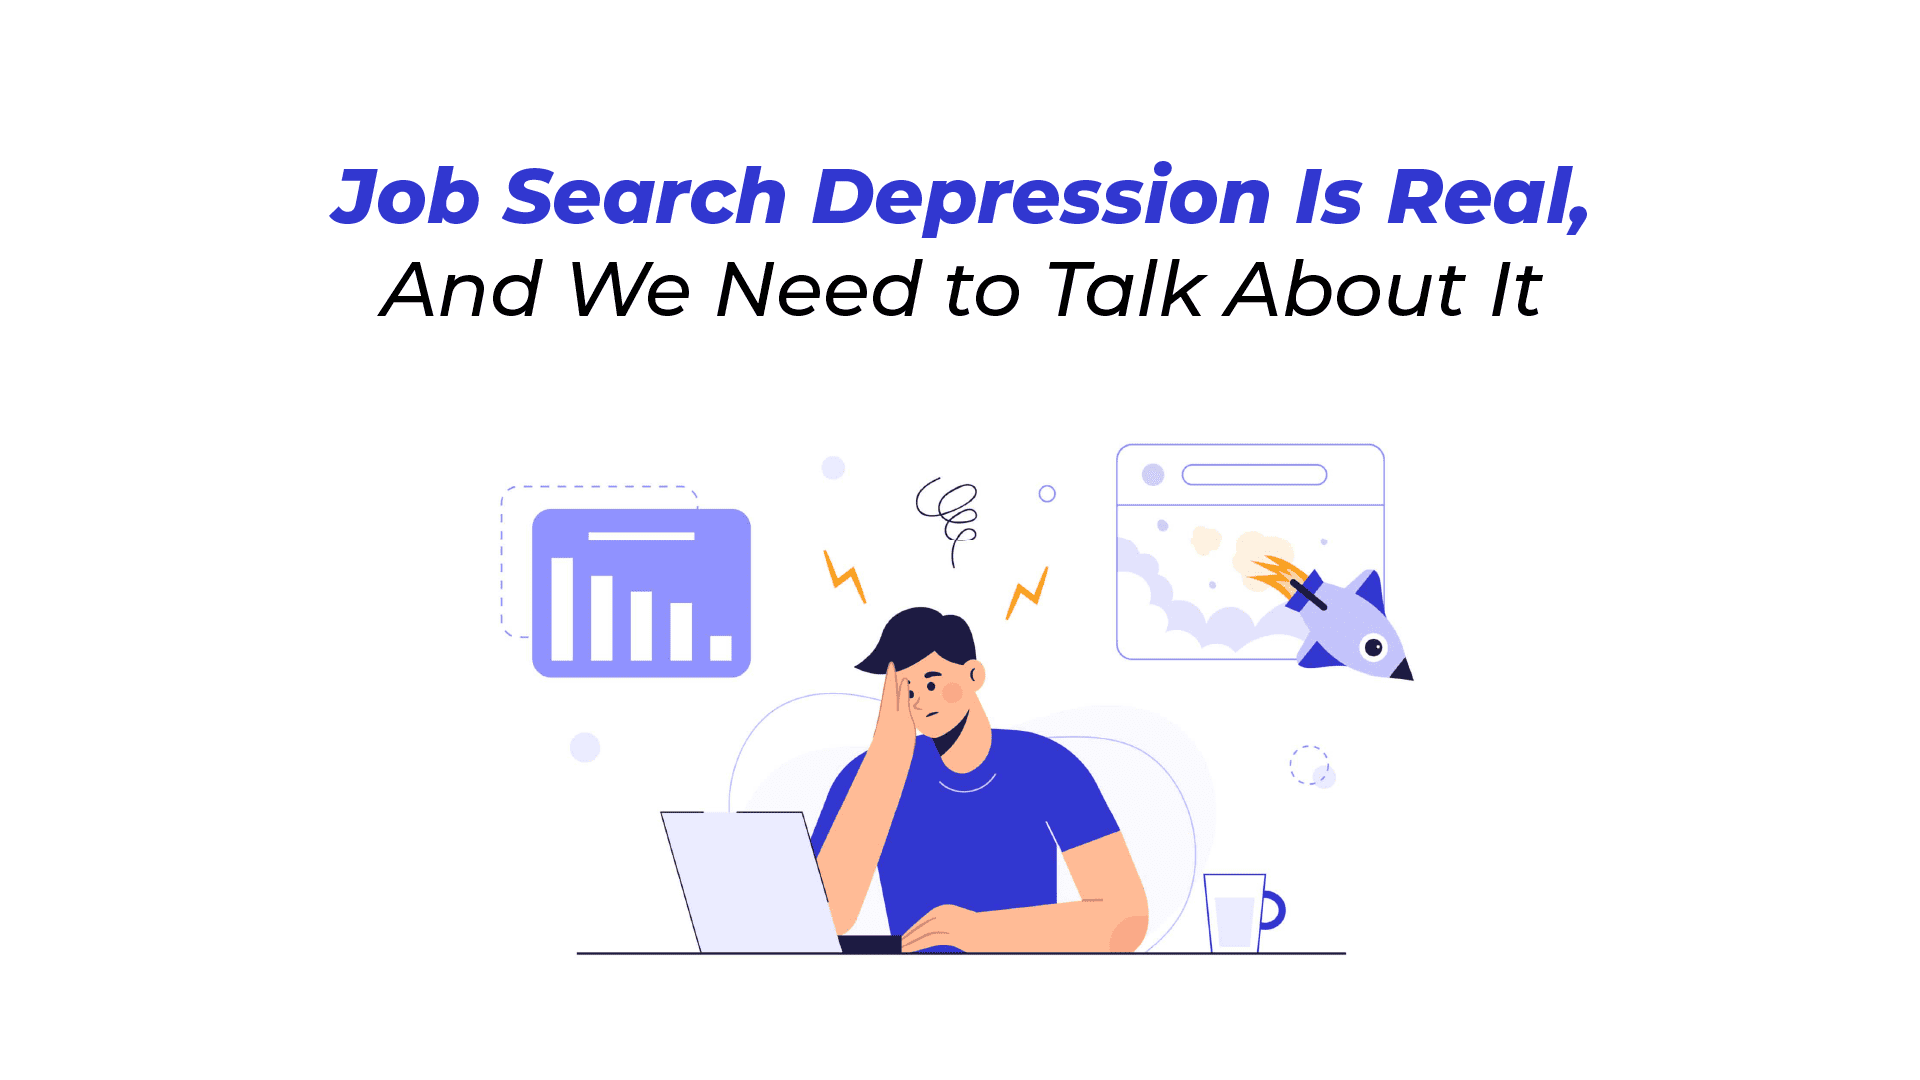 Job Search Depression Is Real, And We Need to Talk About It